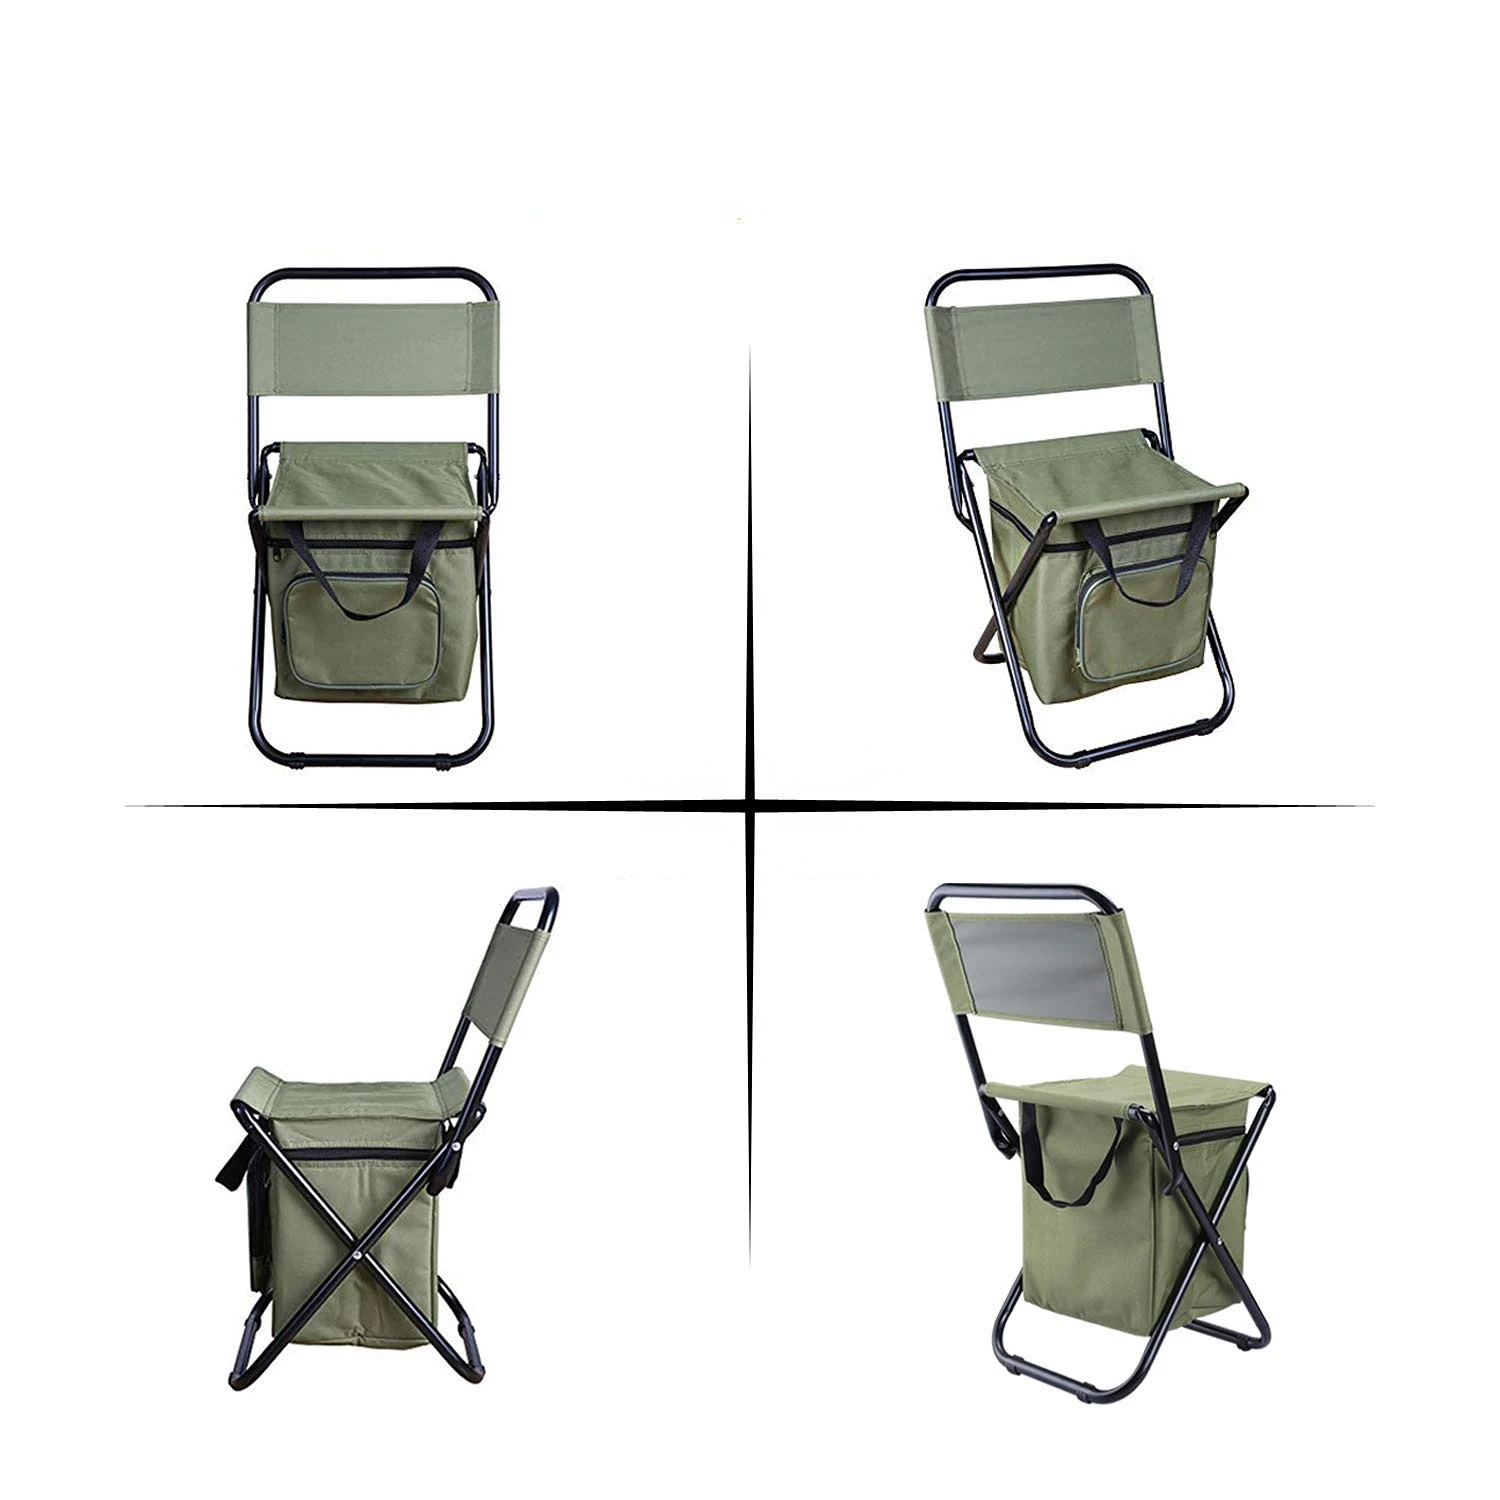 https://ae01.alicdn.com/kf/S89f855682091406e9295bed40f4aed7dh/3-in-1-Outdoor-Foldable-Chair-with-Ice-Storage-Bag-Backrest-Portable-Camping-Chairs-Fishing-Chair.jpg